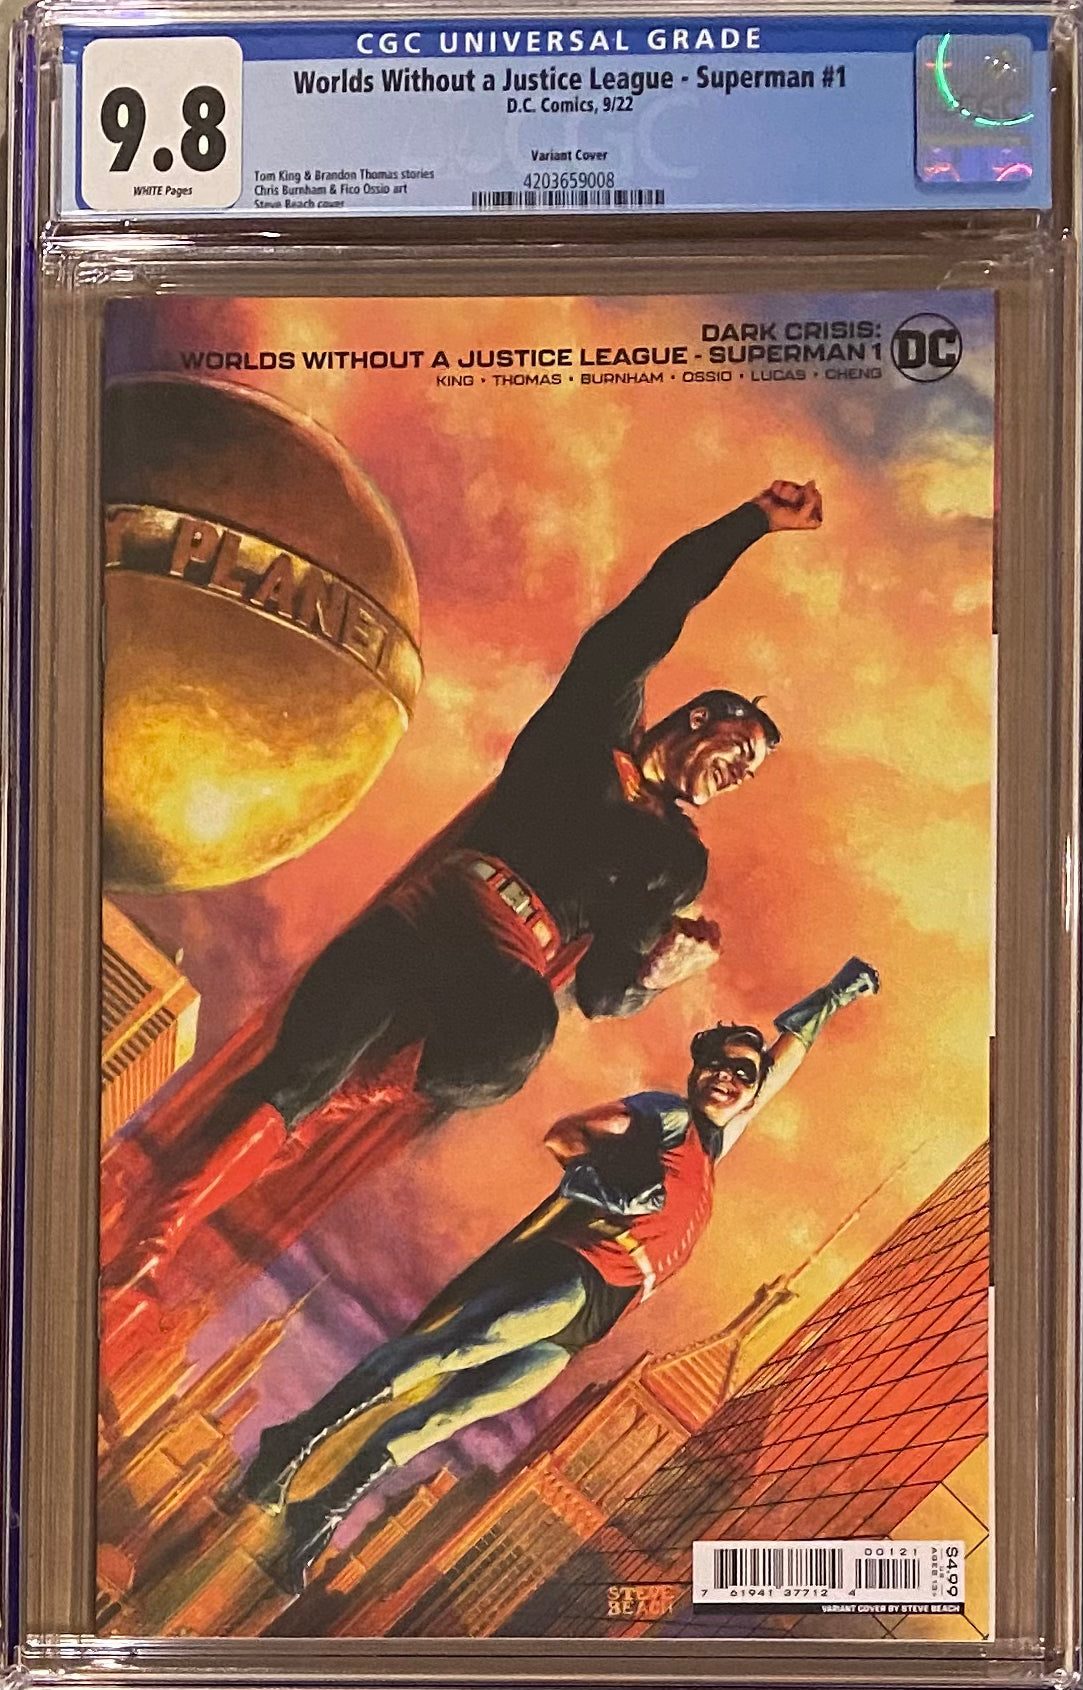 Dark Crisis: Worlds Without A Justice League - Superman #1 Beach 1:25 Retailer Incentive Variant CGC 9.8